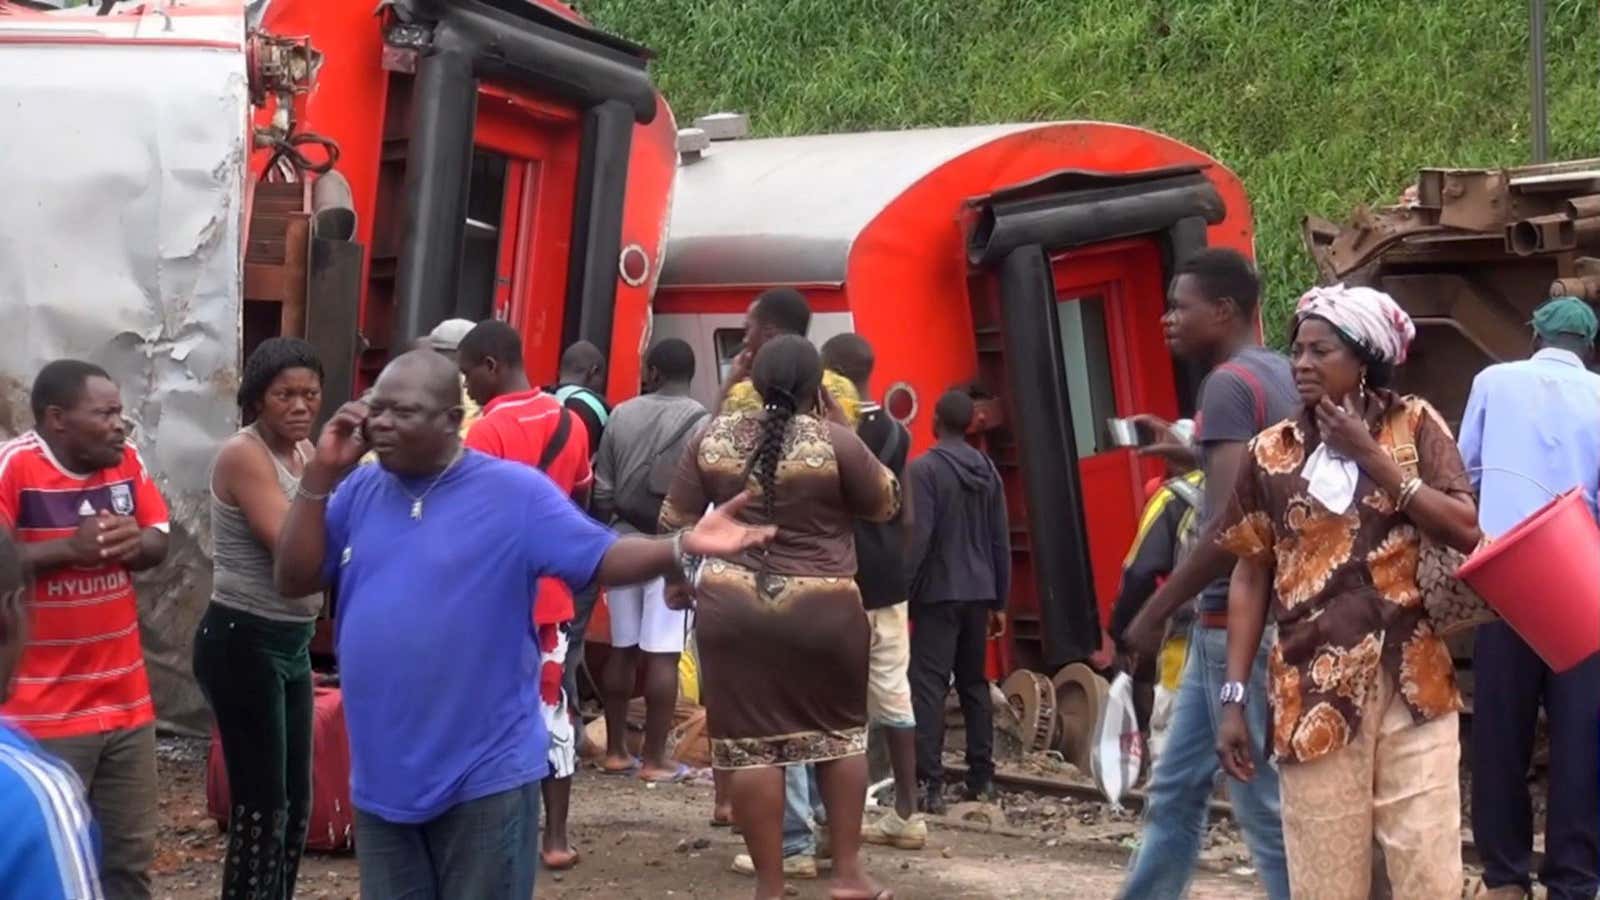 Passengers stand beside derailed train carriages after an accident in Eseka, Cameroon on Oct. 21.